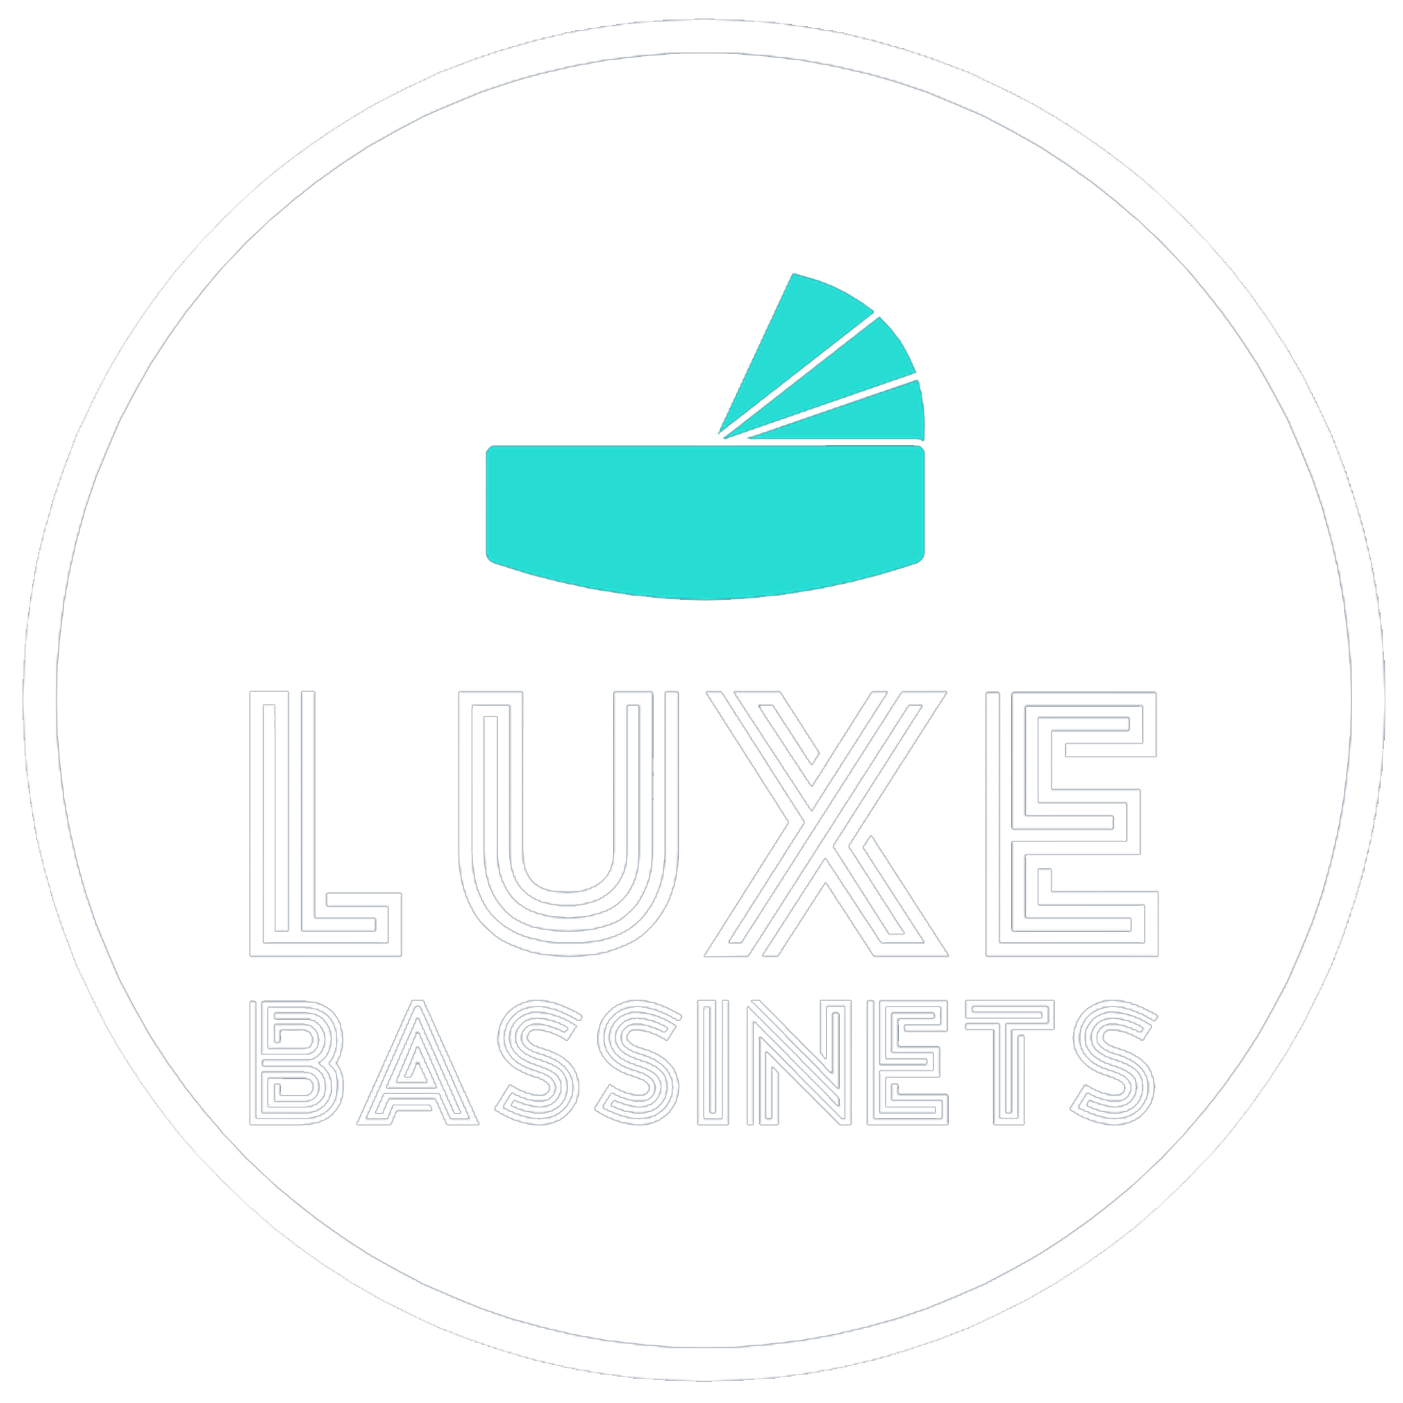 Luxe Bassinets